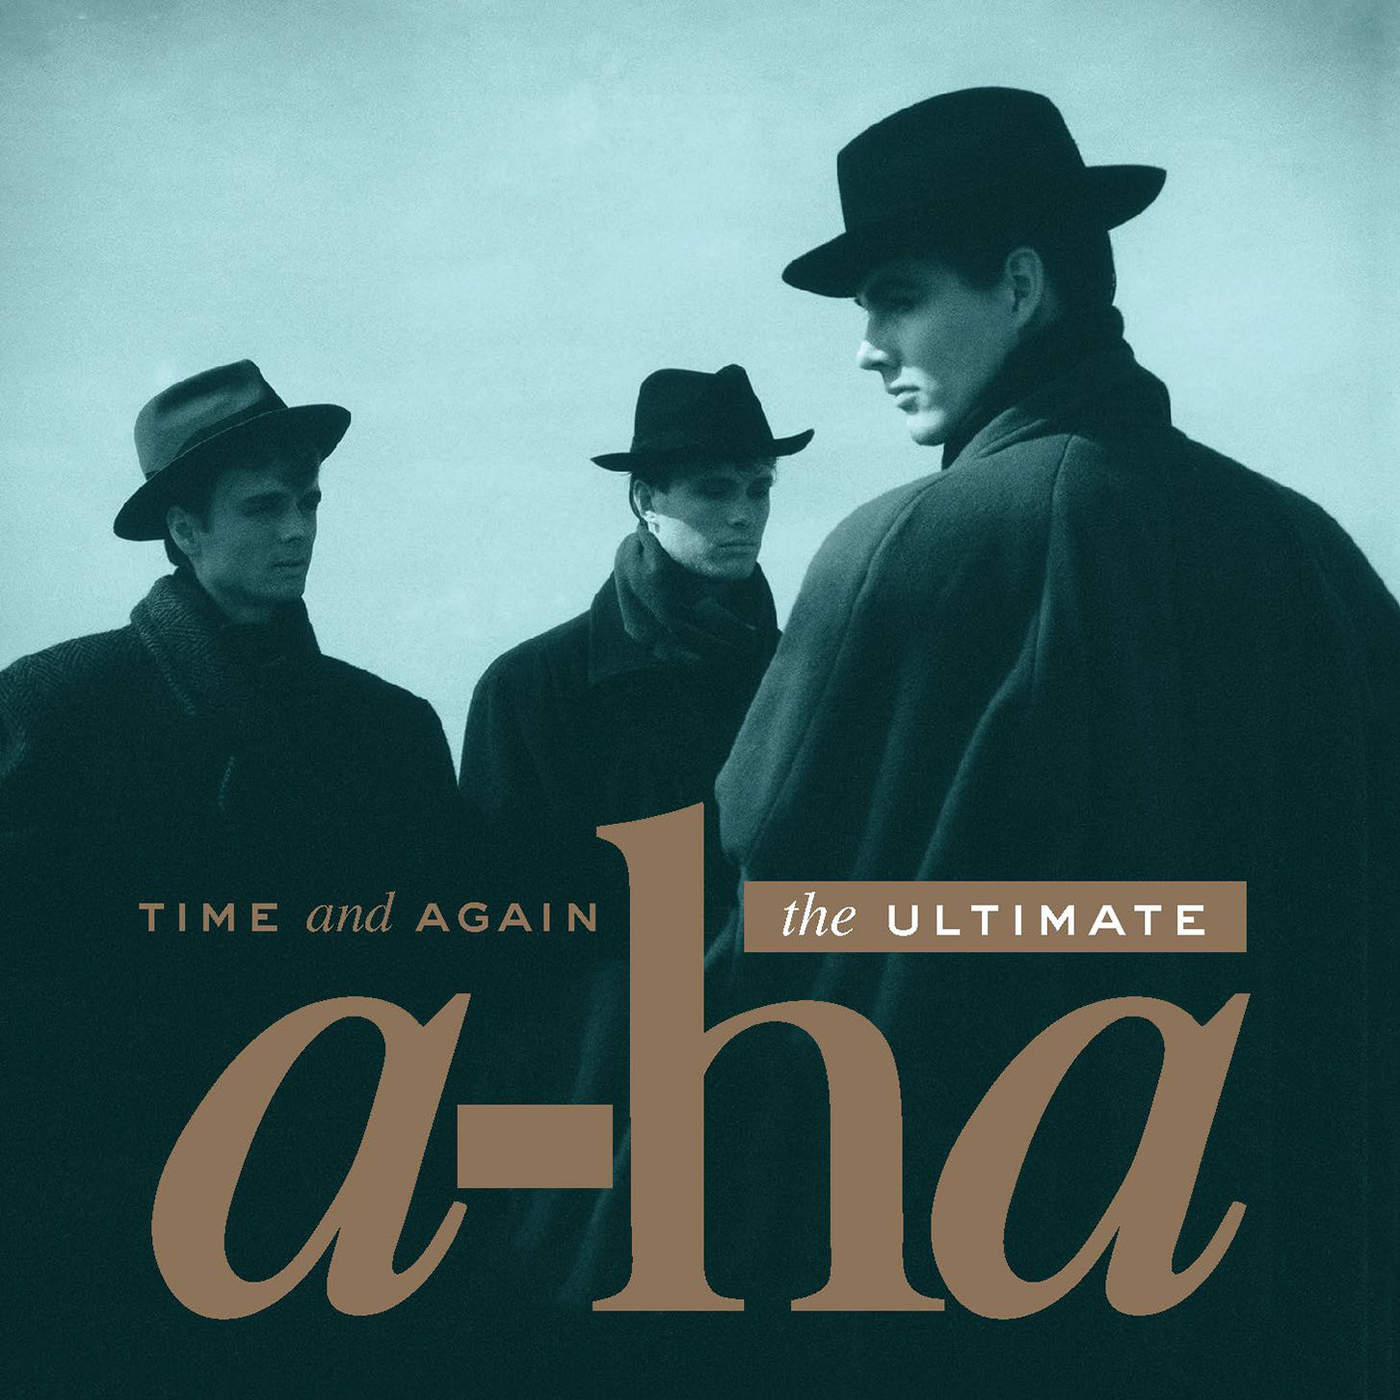 A-Ha - Take on Me (2016 Remastered)